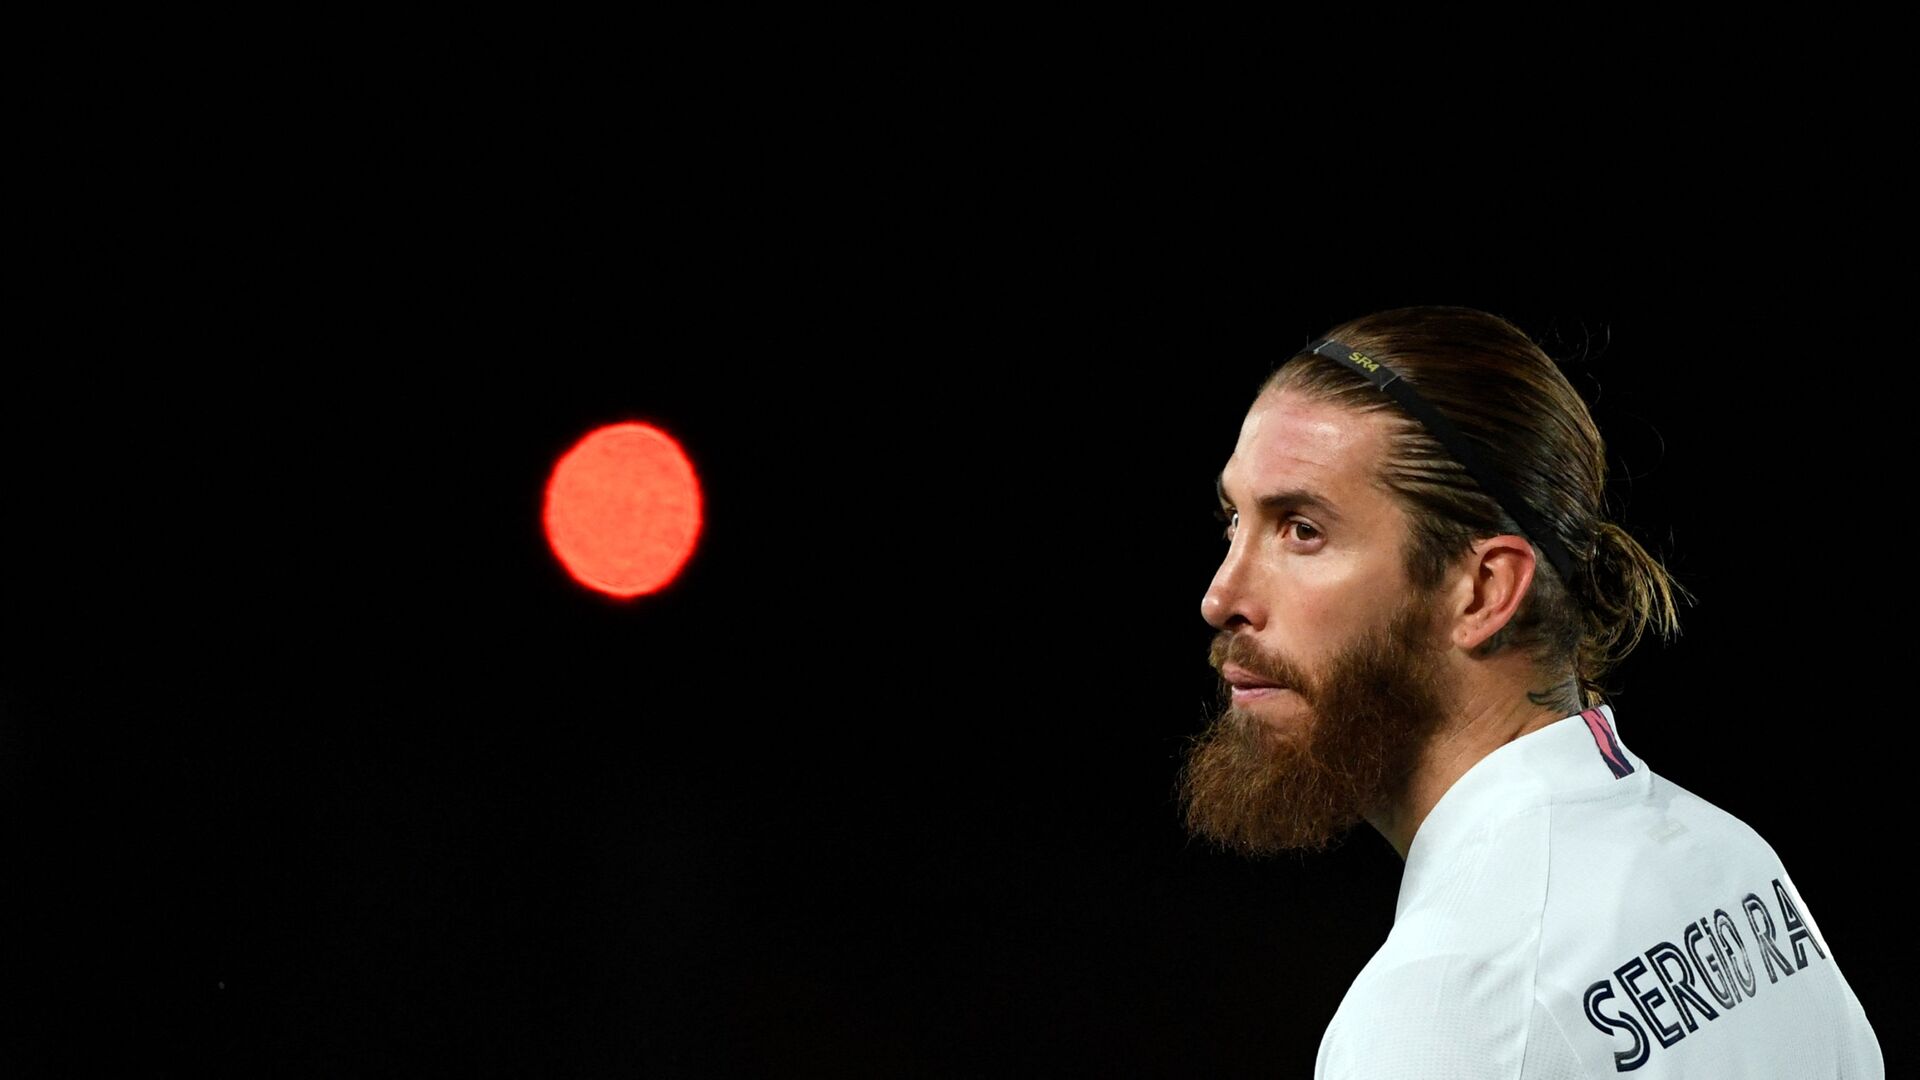 Sergio Ramos    Real Madrid's Spanish defender Sergio Ramos looks on during the UEFA Champions League round of 16 second leg football match between Real Madrid CF and Atalanta at the Alfredo di Stefano stadium in Valdebebas, on the outskirts of Madrid on March 15, 2021 - اسپوتنیک افغانستان  , 1920, 01.07.2021